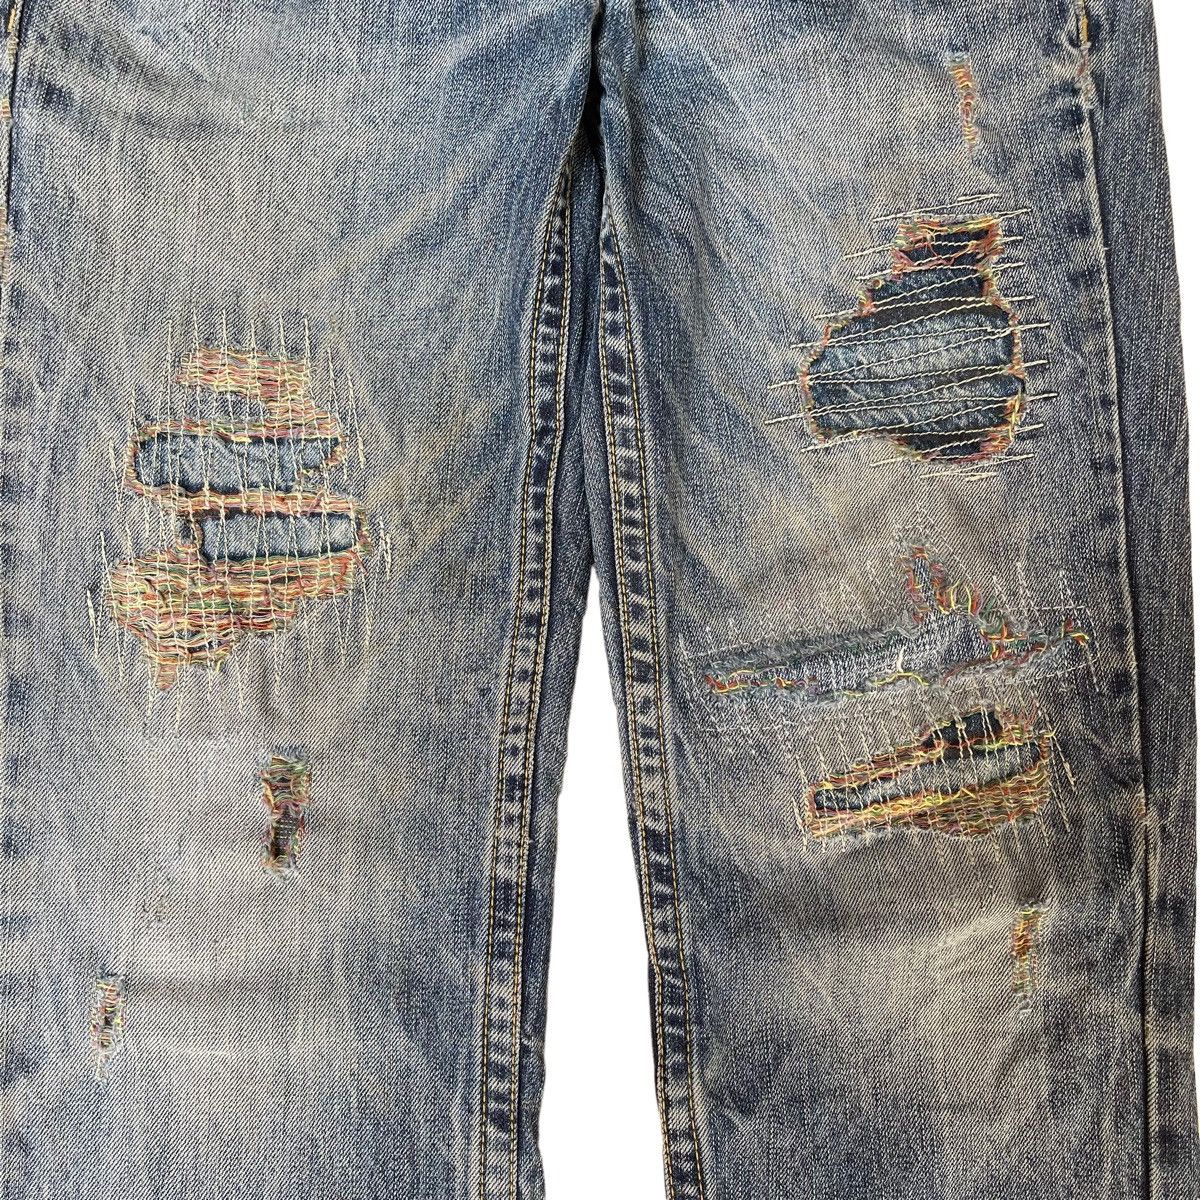 ✅BINDING NOW✅ Japanese Cloud72 Skull Jeans Disteressed Rare - 5